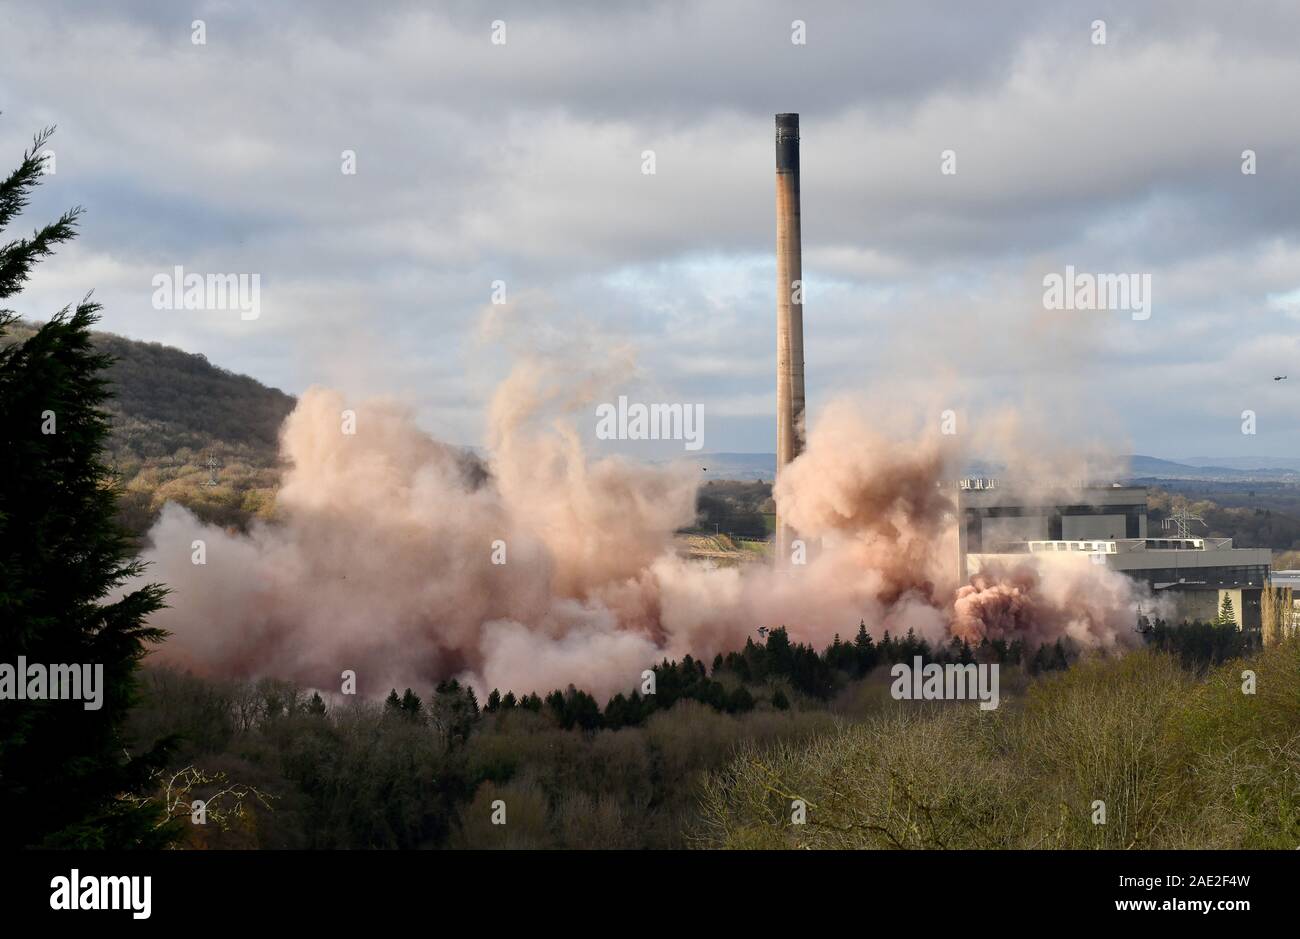 Shropshire, UK. 06th Dec, 2019. Ironbridge Power Station December 6th 2019. The iconic pink cooling towers of Ironbridge Power Station are reduced to rubble as they are demolished by an explosive blow down. The towers have dominated the landscape at the entrance to the Ironbridge Gorge fro over 50 years. Credit: David Bagnall/Alamy Live News Stock Photo